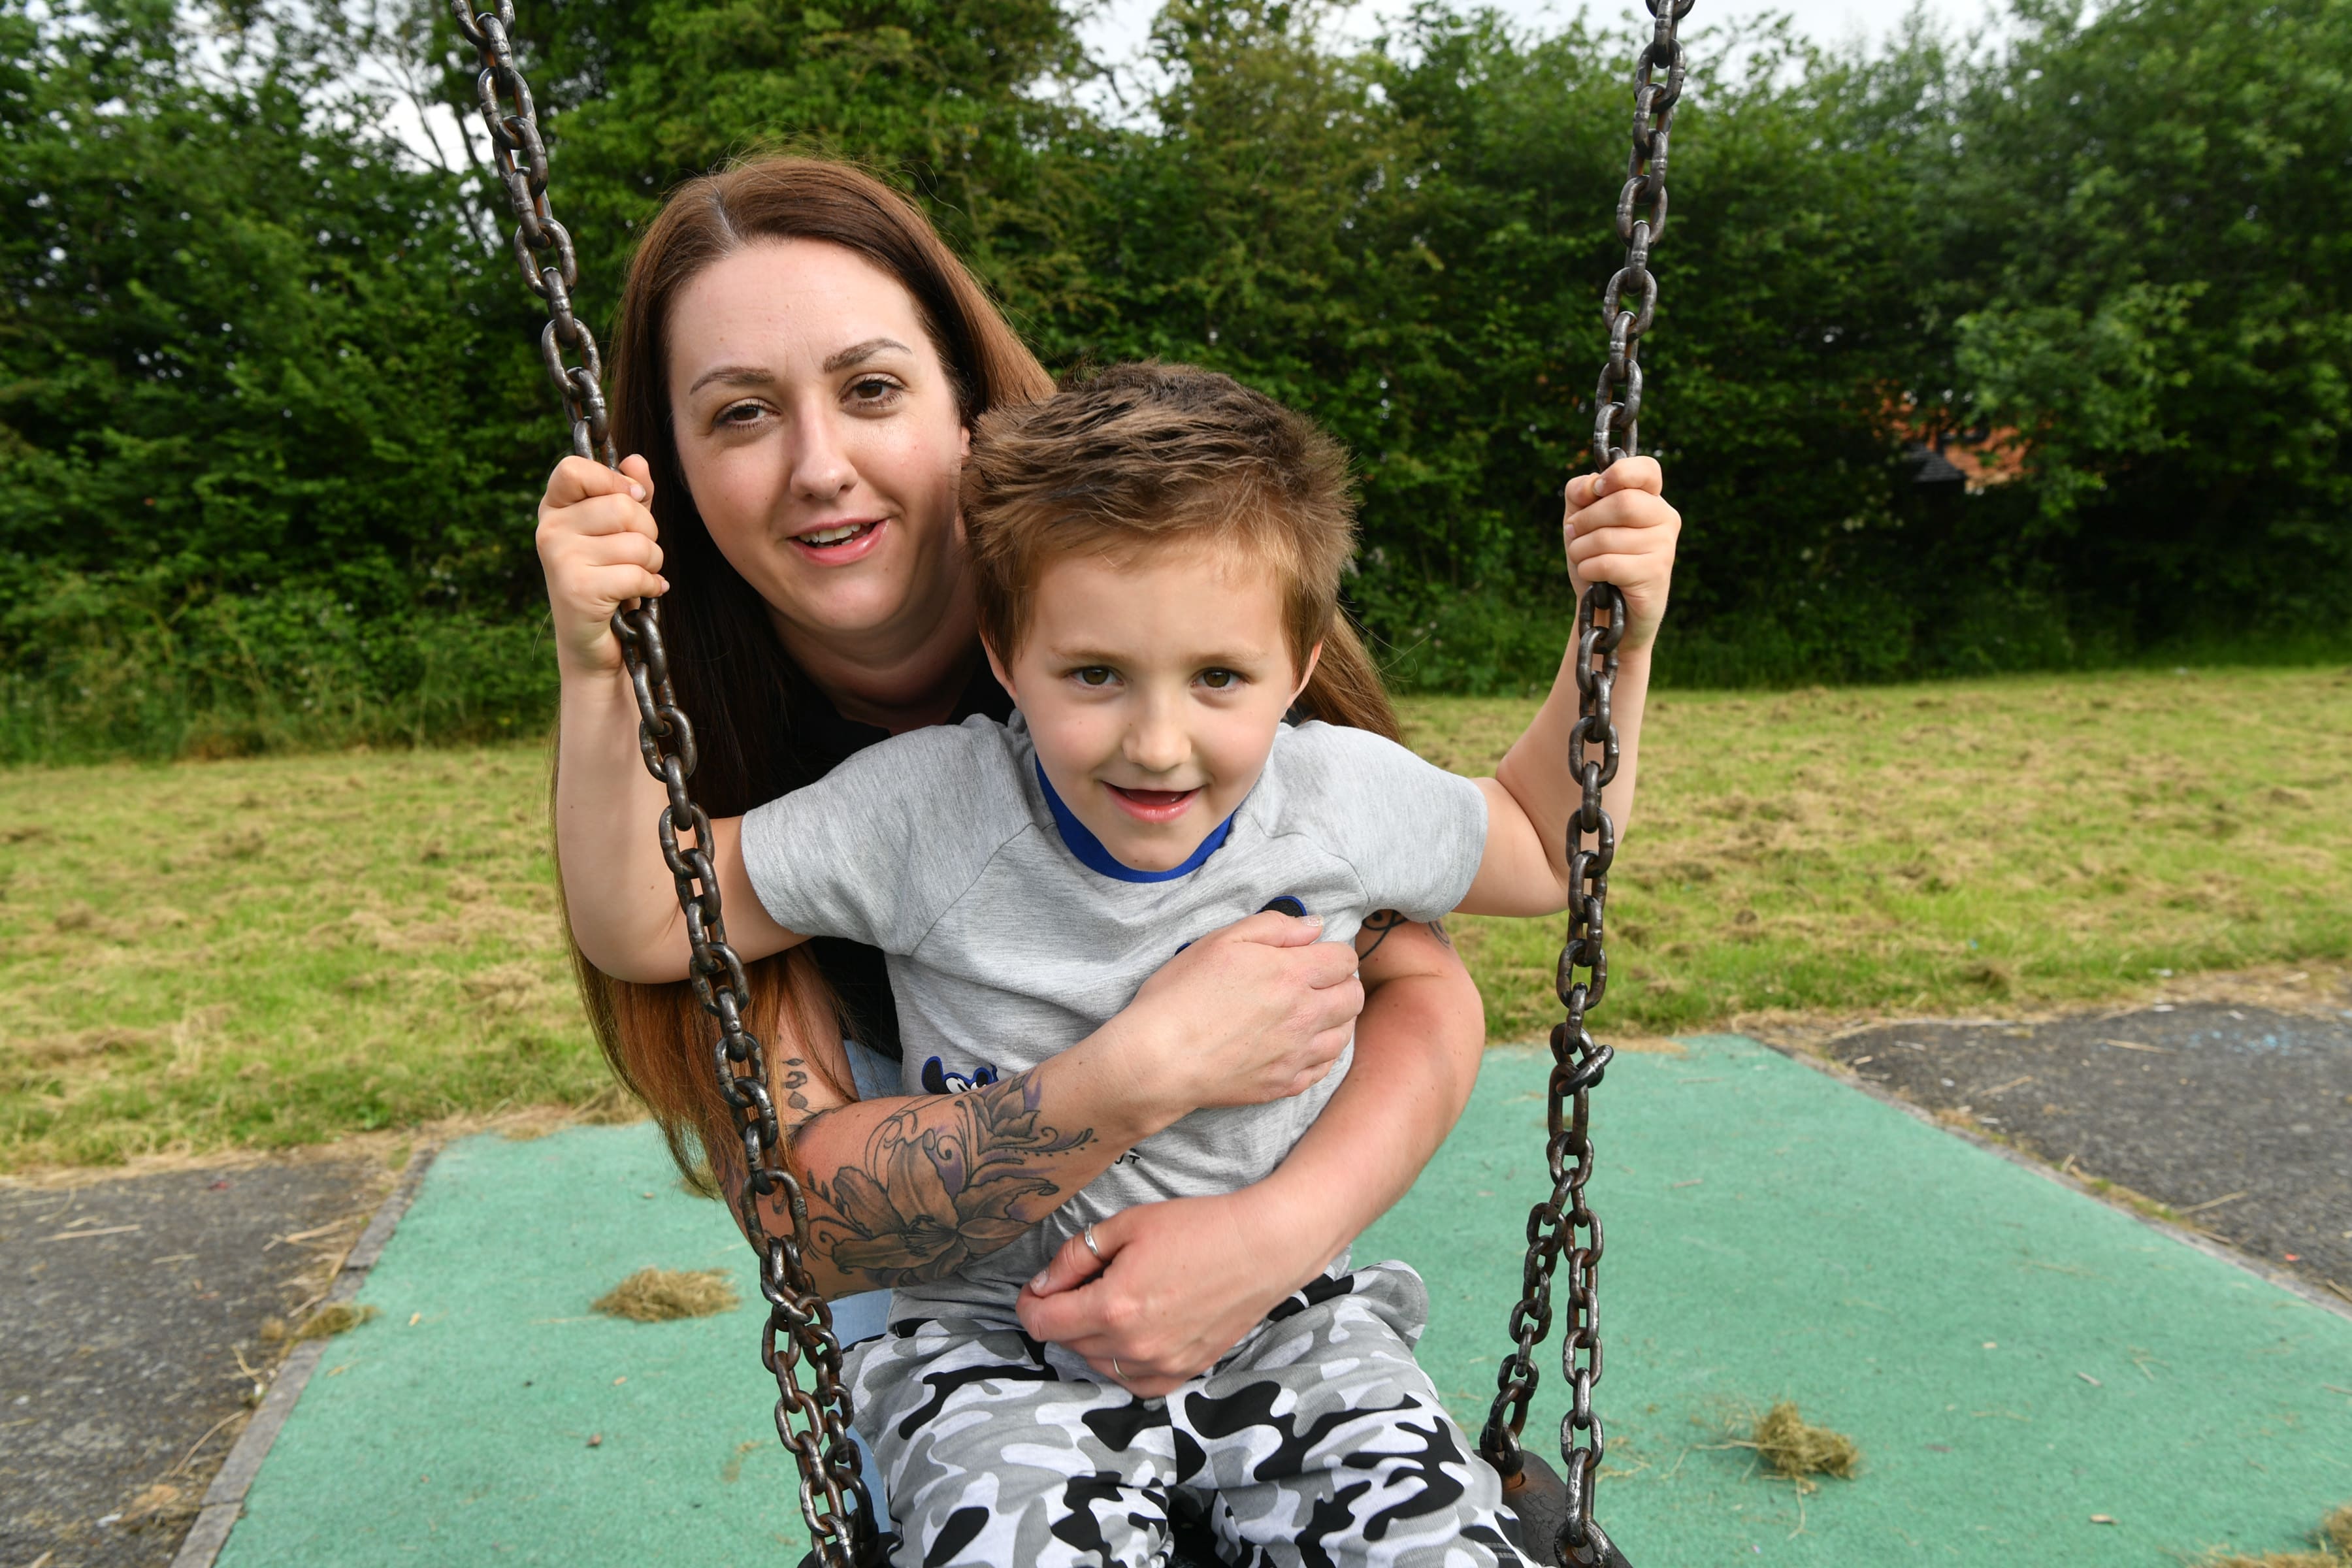 Harley sits on a swing while his mum hugs him